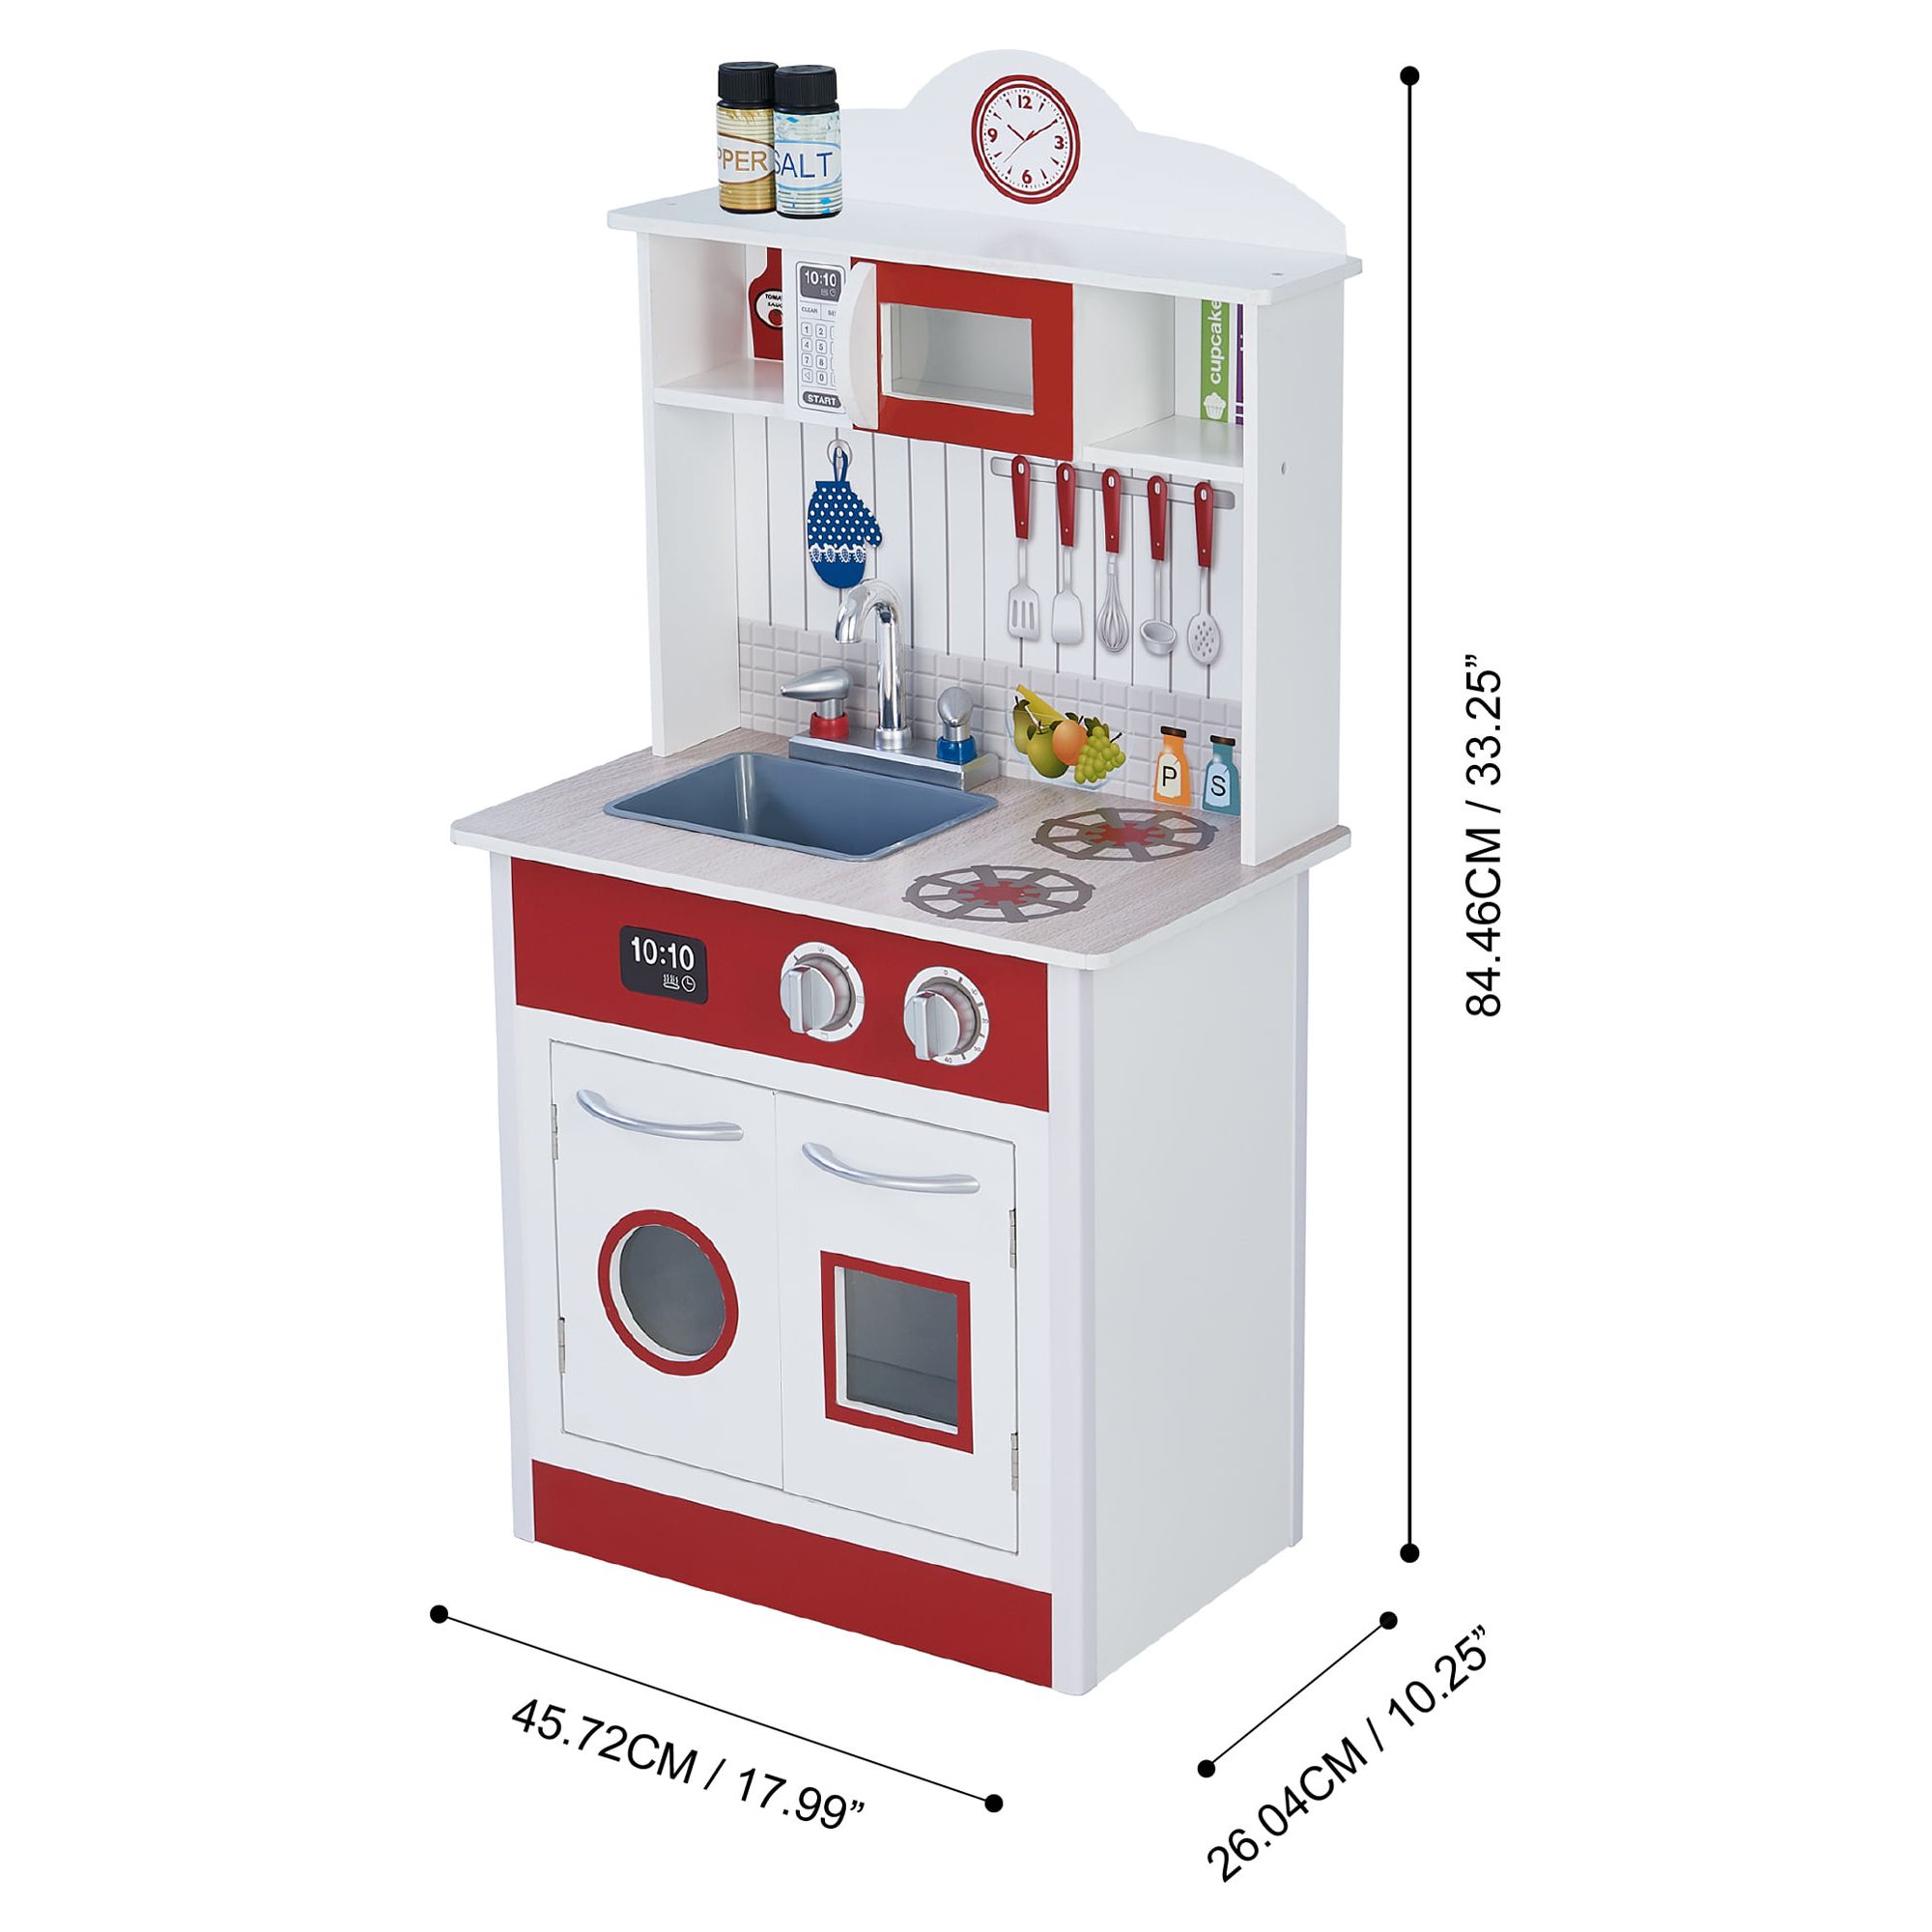 Teamson Kids Little Chef Madrid Classic Kids Kitchen Playset, Red/White - image 5 of 11